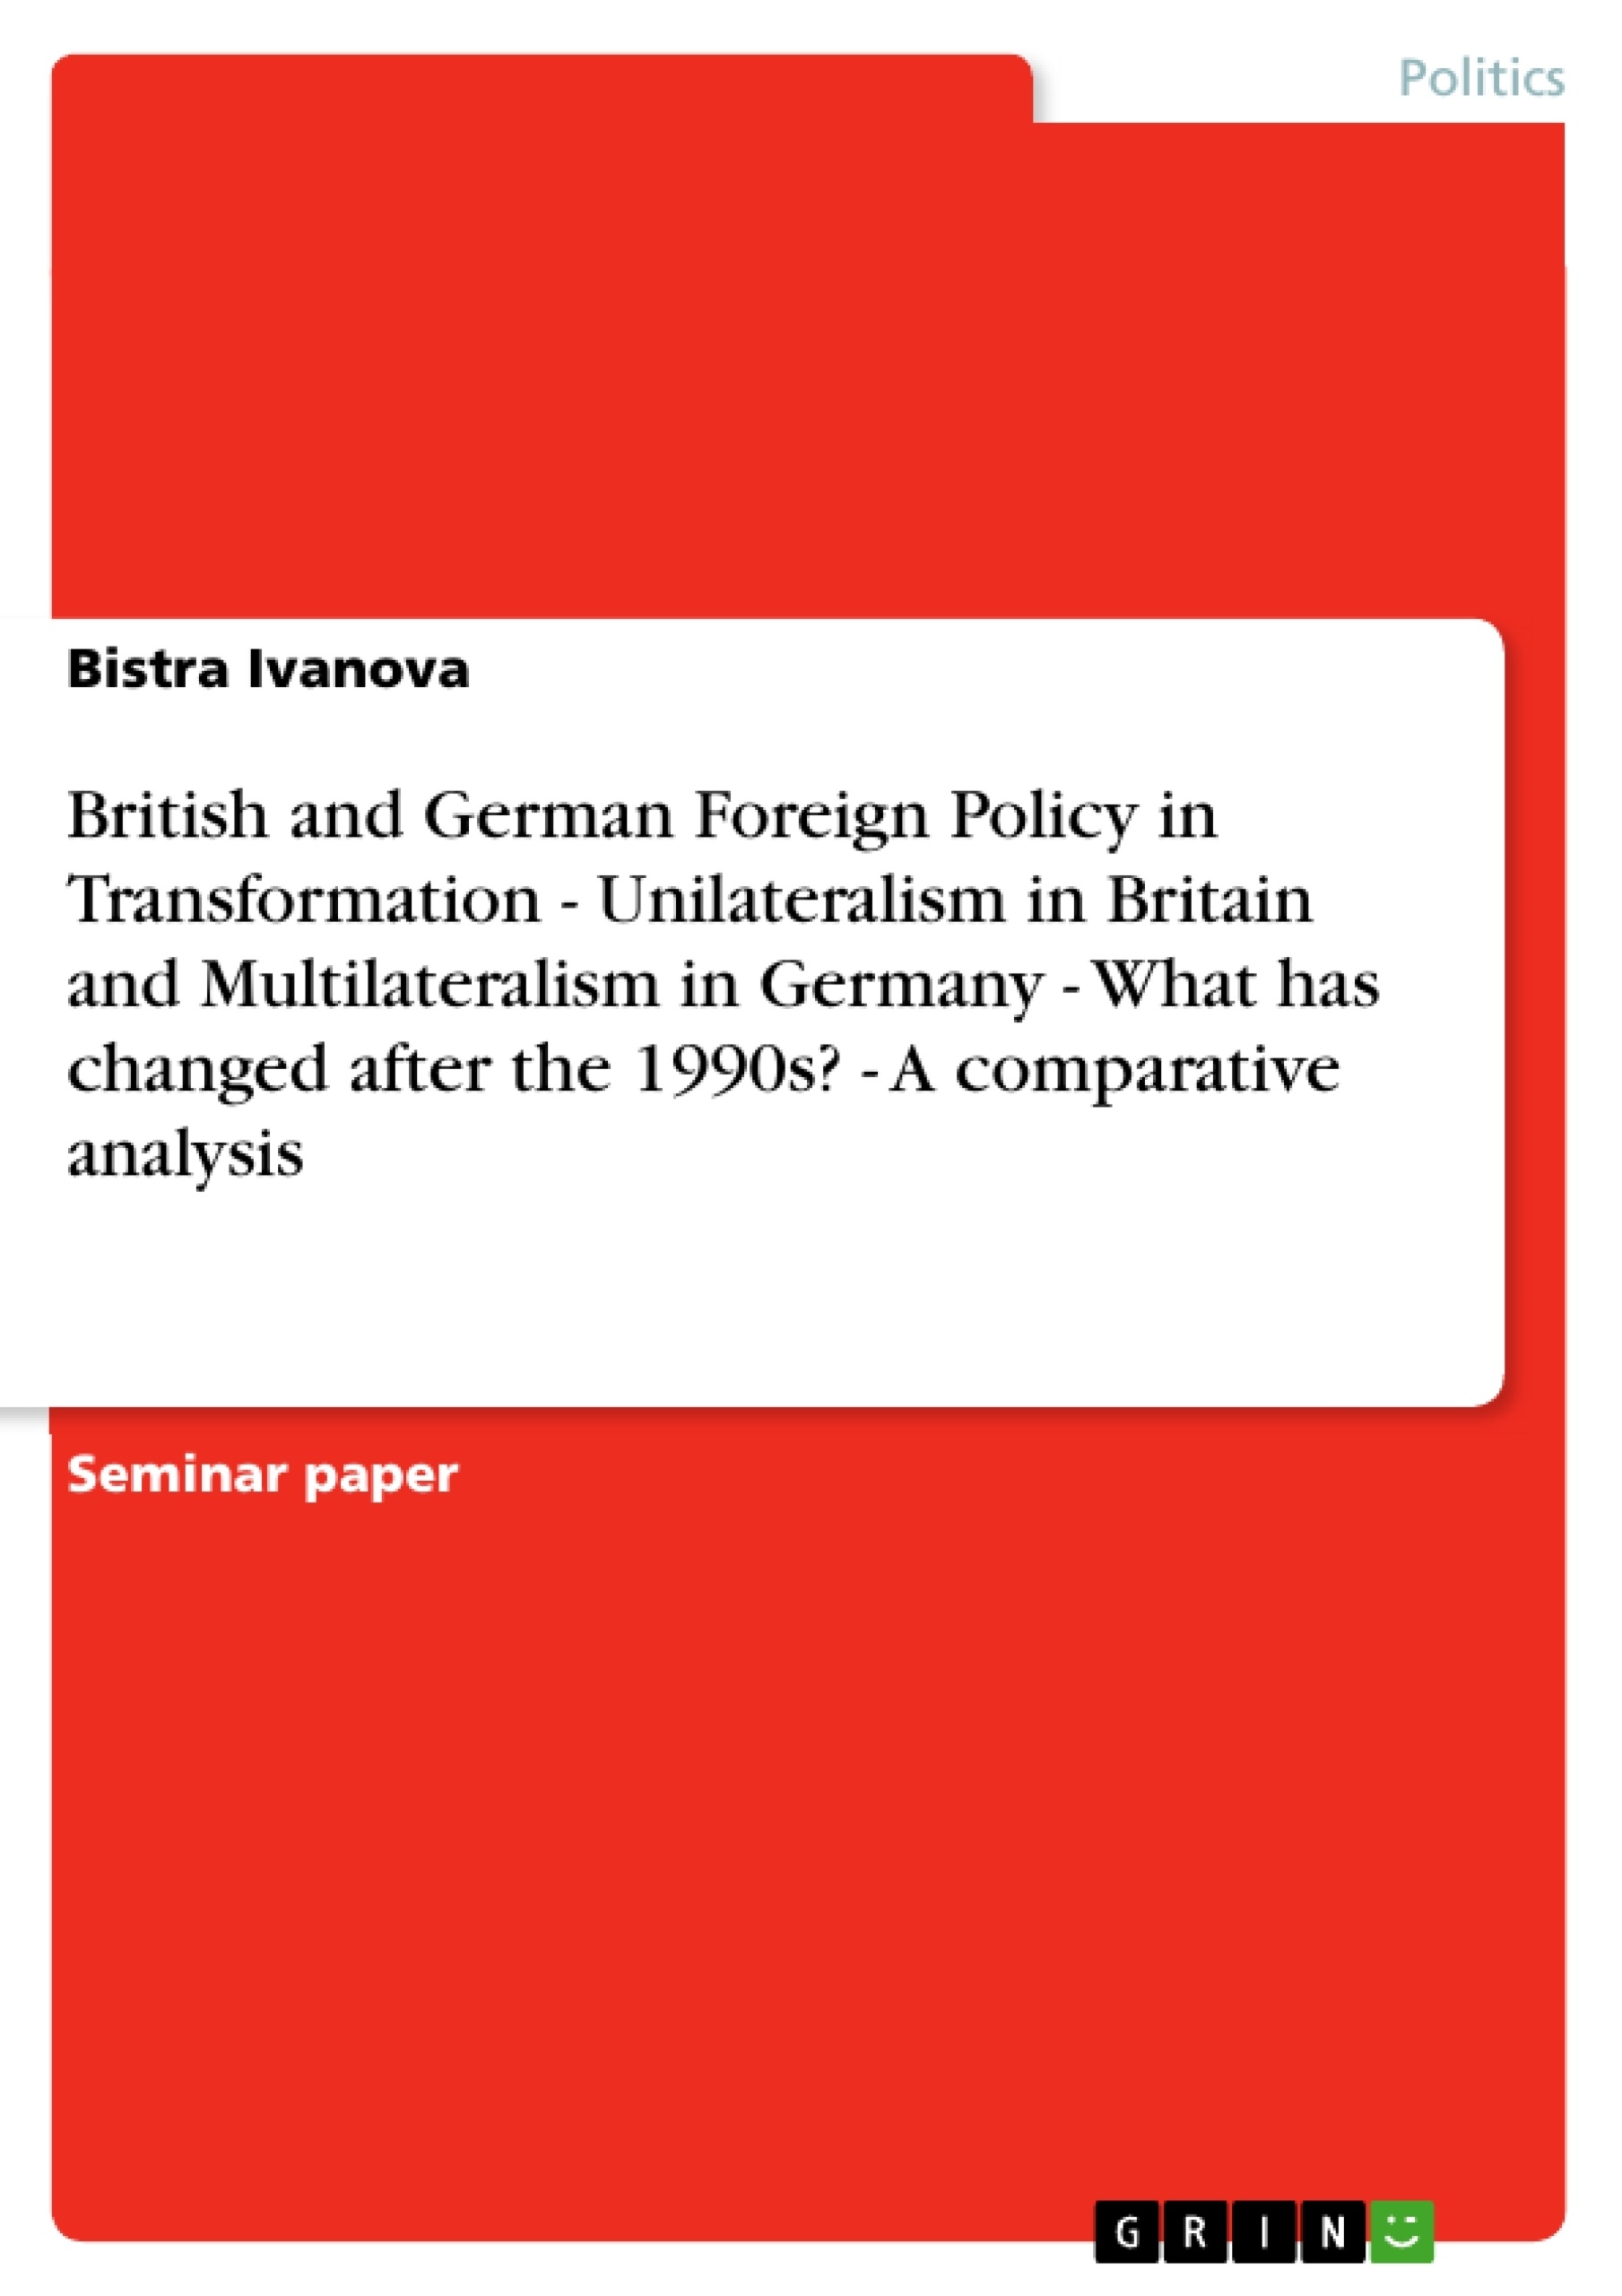 Titre: British and German Foreign Policy in Transformation - Unilateralism in Britain and Multilateralism in Germany - What has changed after the 1990s? - A comparative analysis